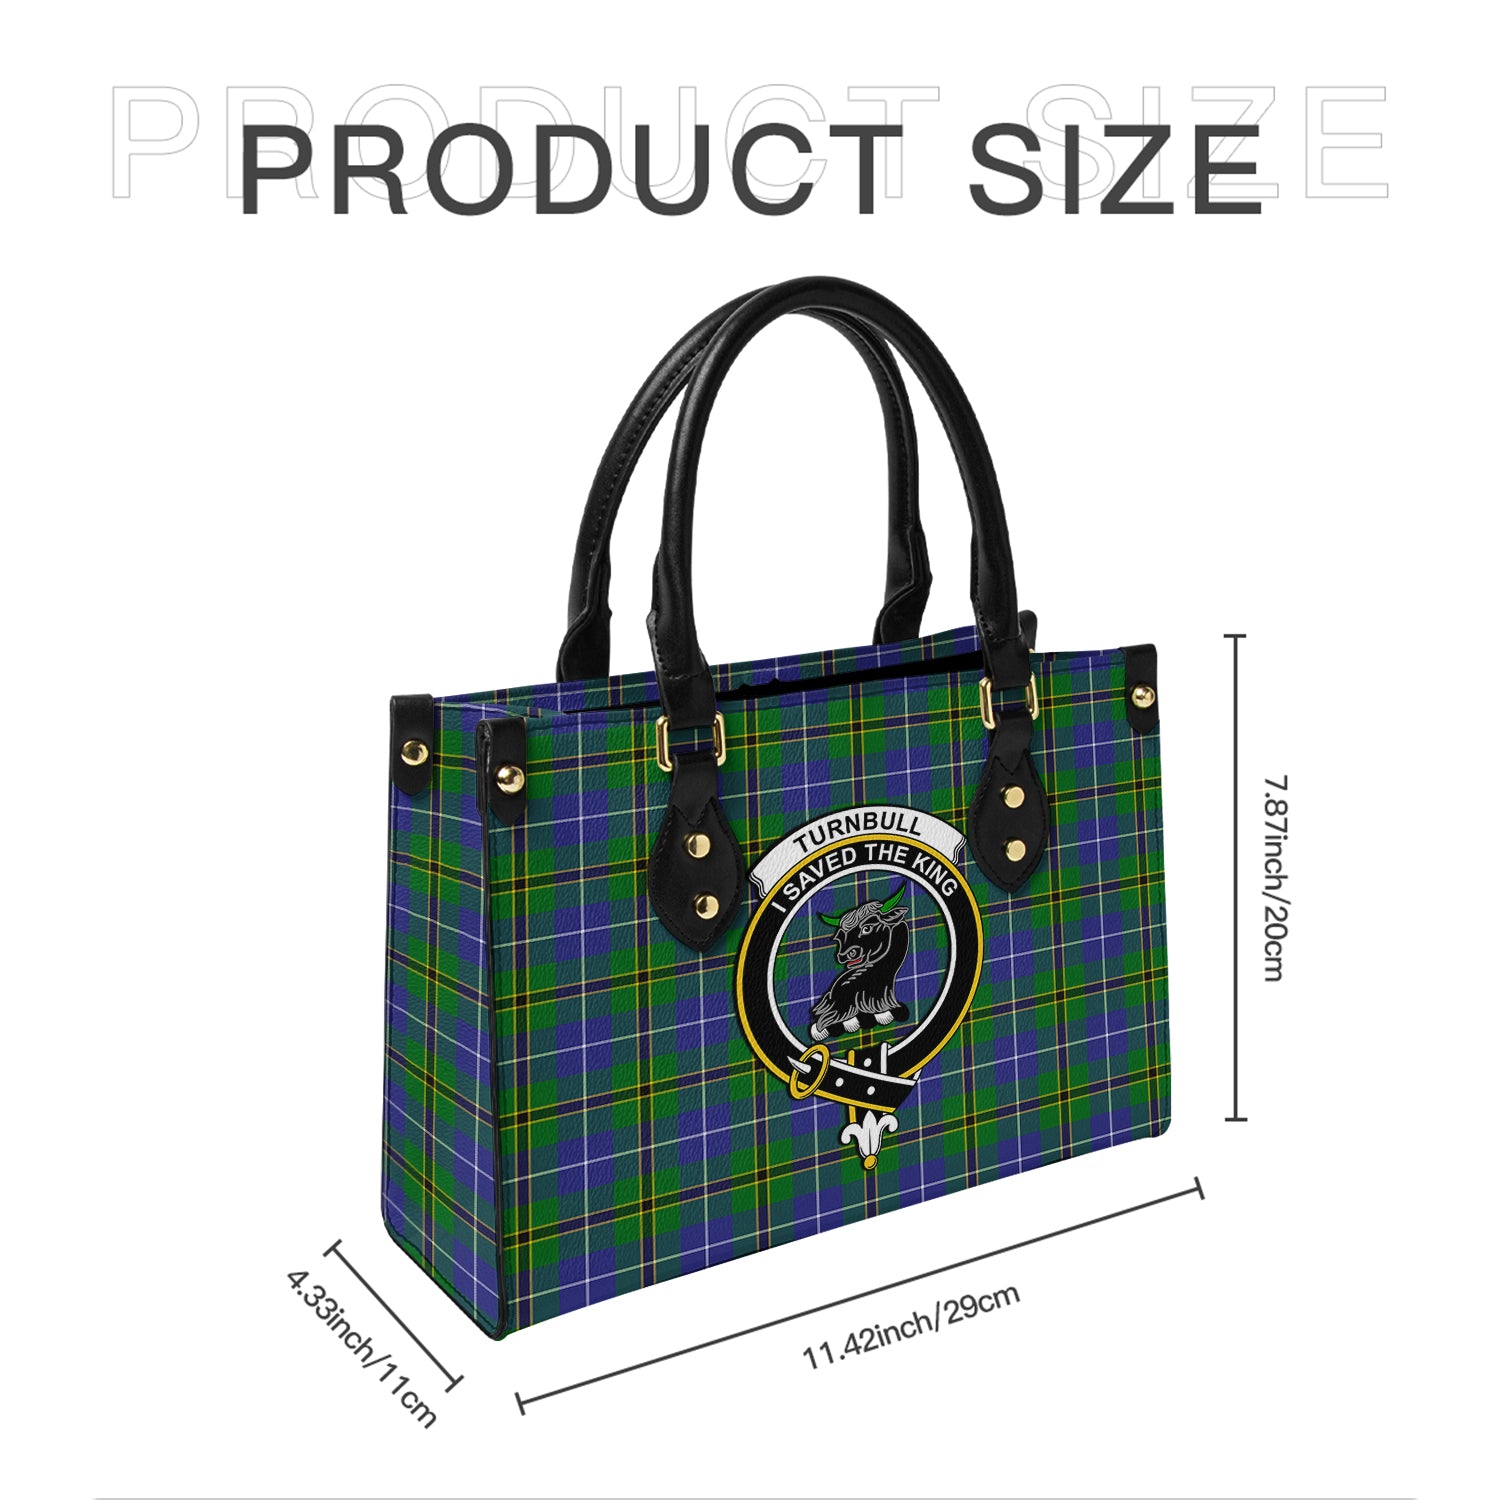 turnbull-hunting-tartan-leather-bag-with-family-crest